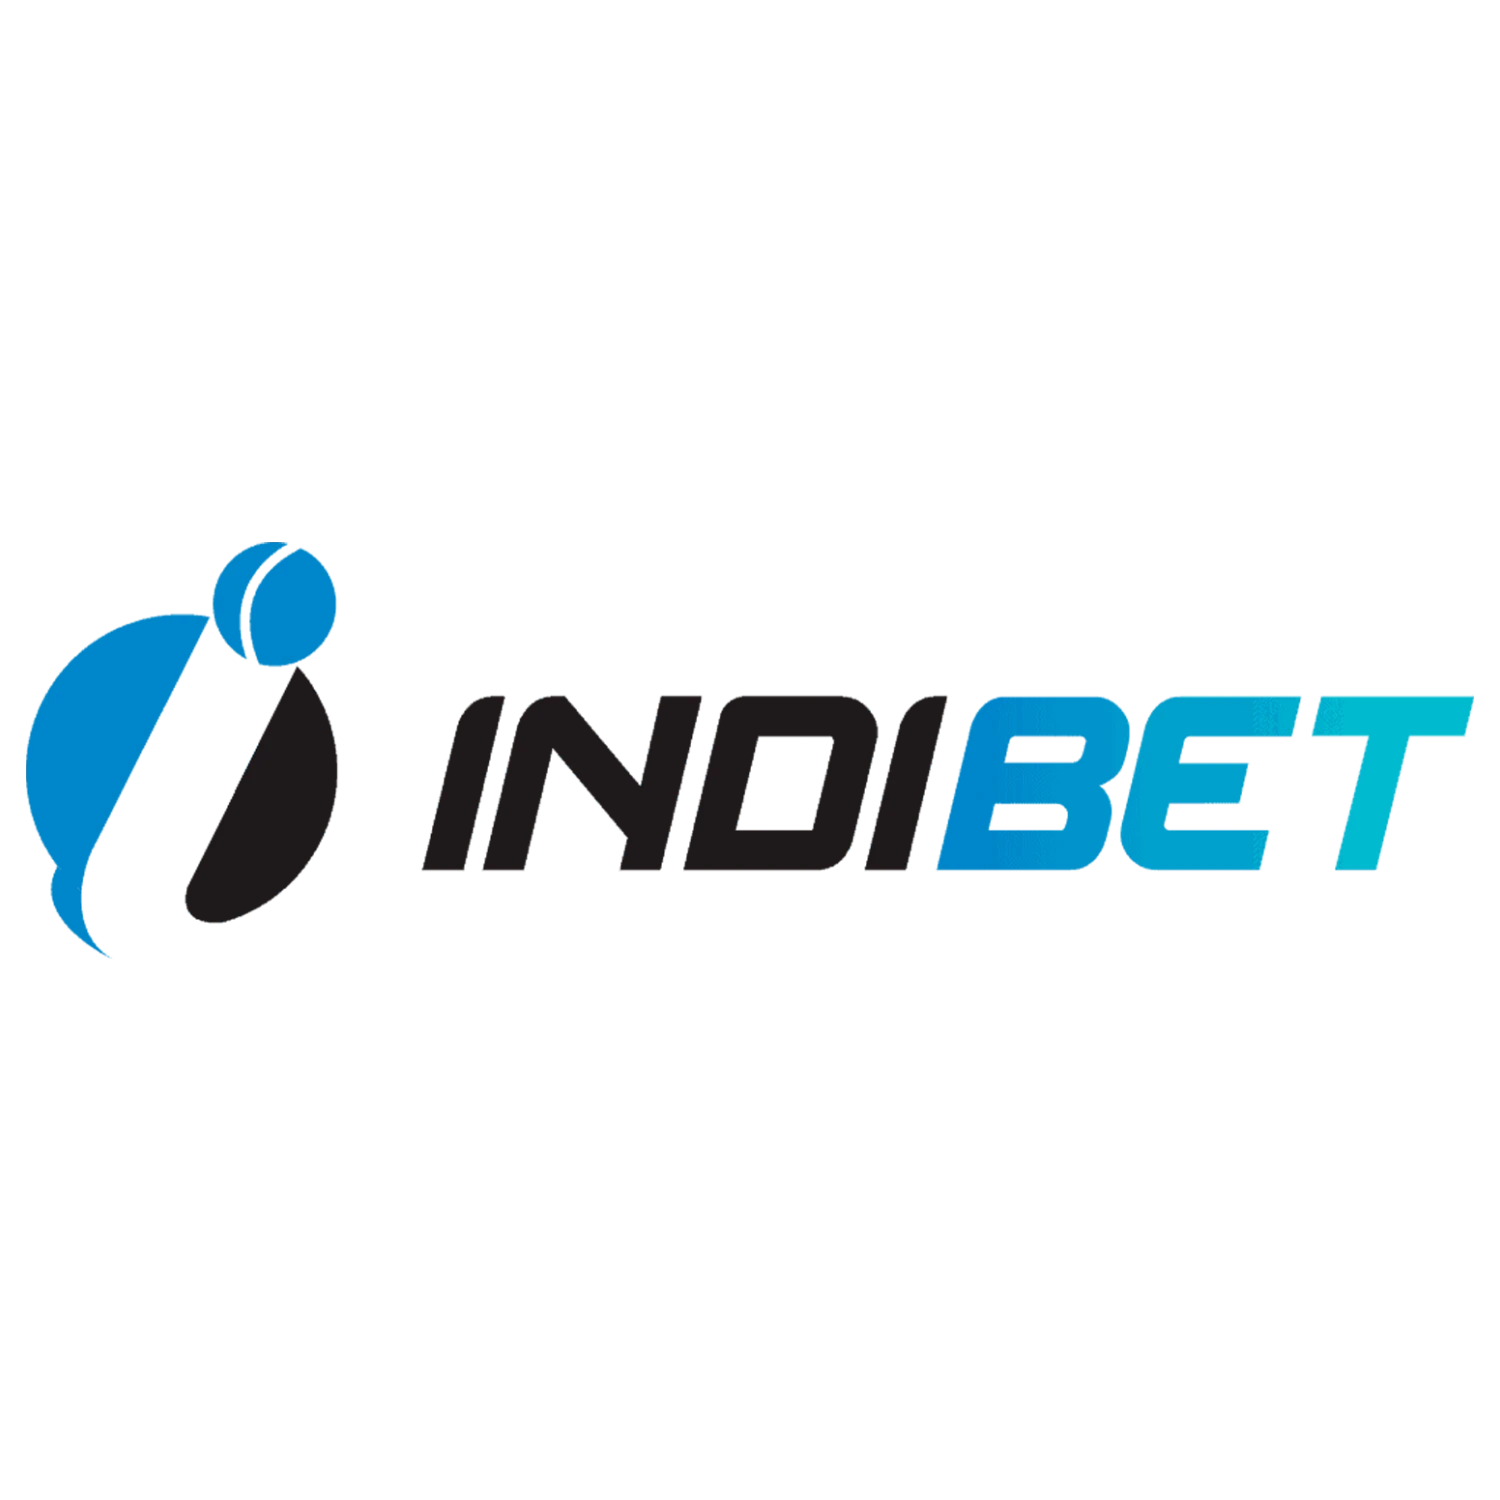 Place your bets directly during the match with Indibet.